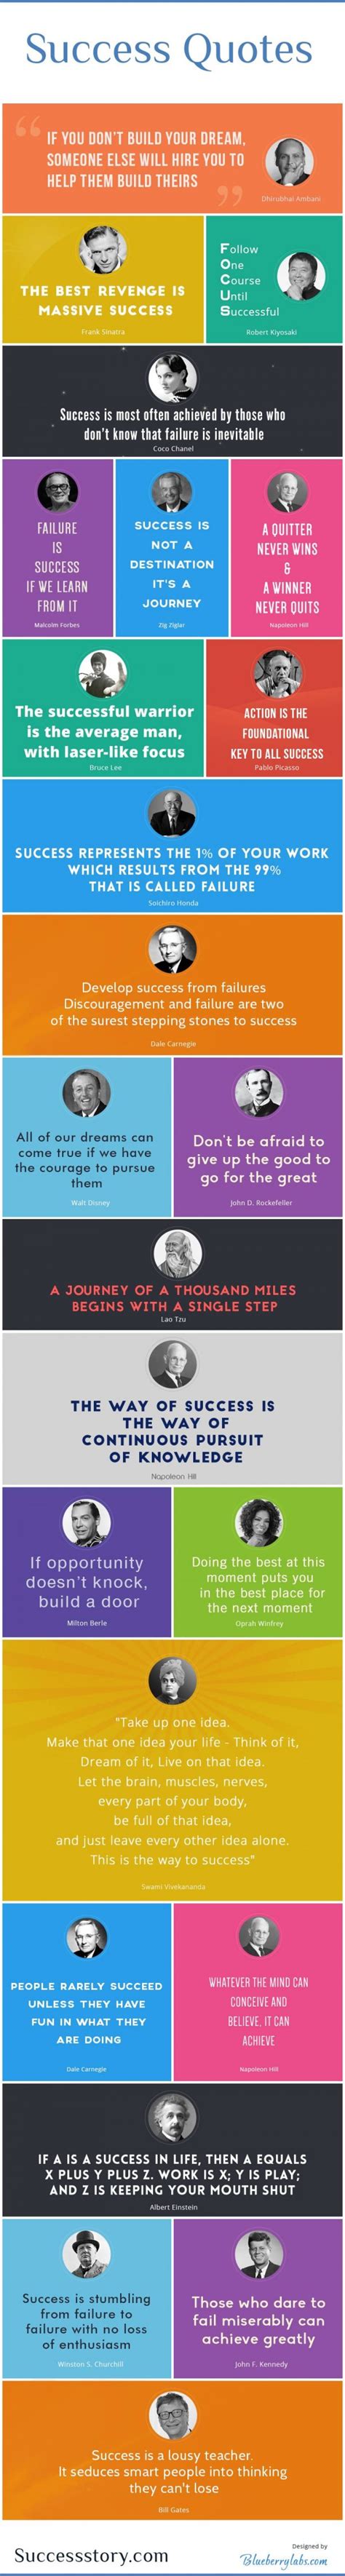 Success Quotes Infographic Self Help Daily